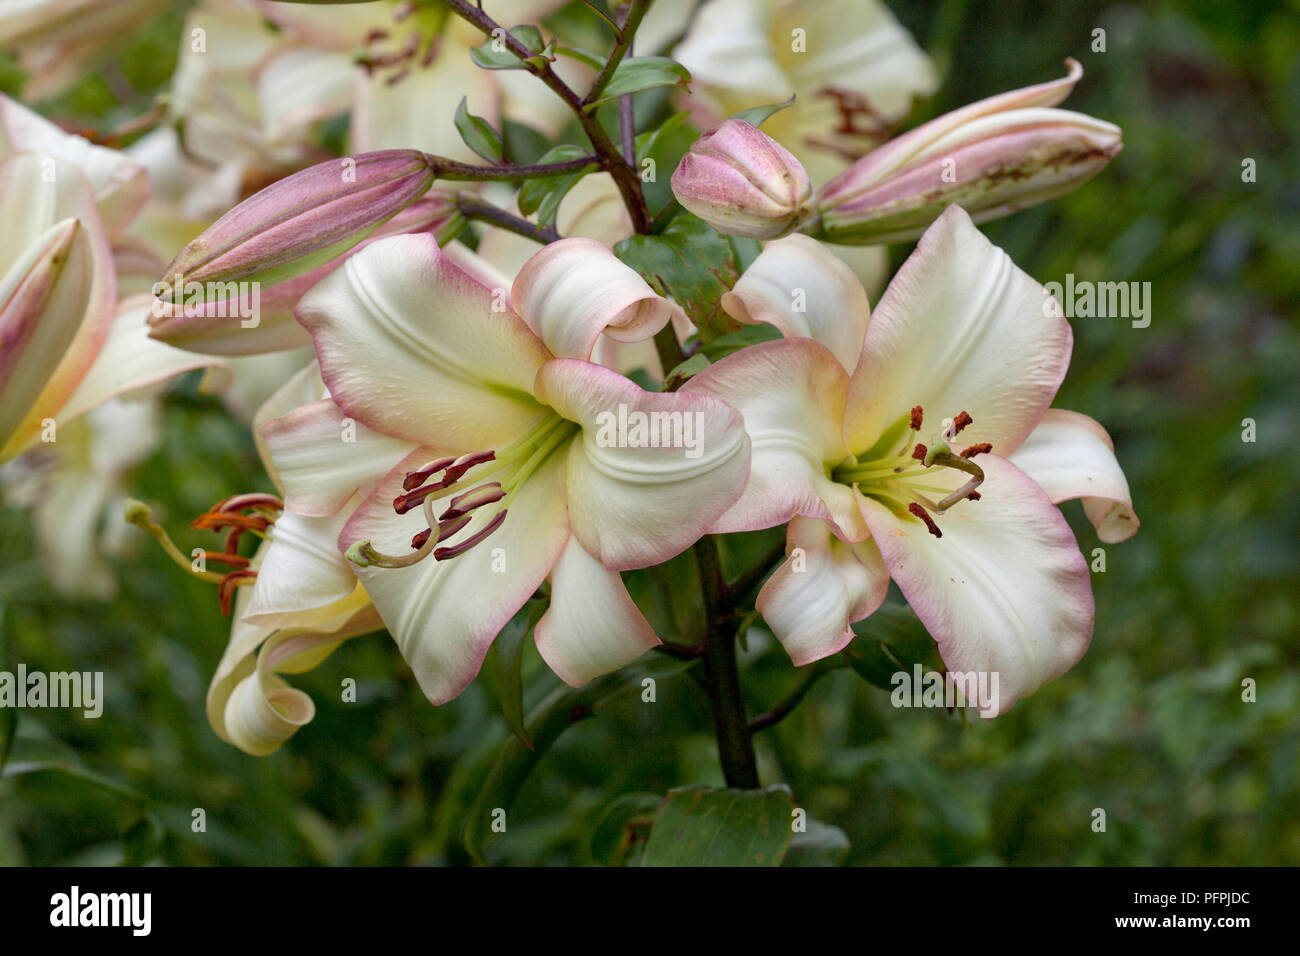 Lilium 'Boogie Woogie', oriental trumpet lily, cream-white and pink flowers, close-up Stock Photo